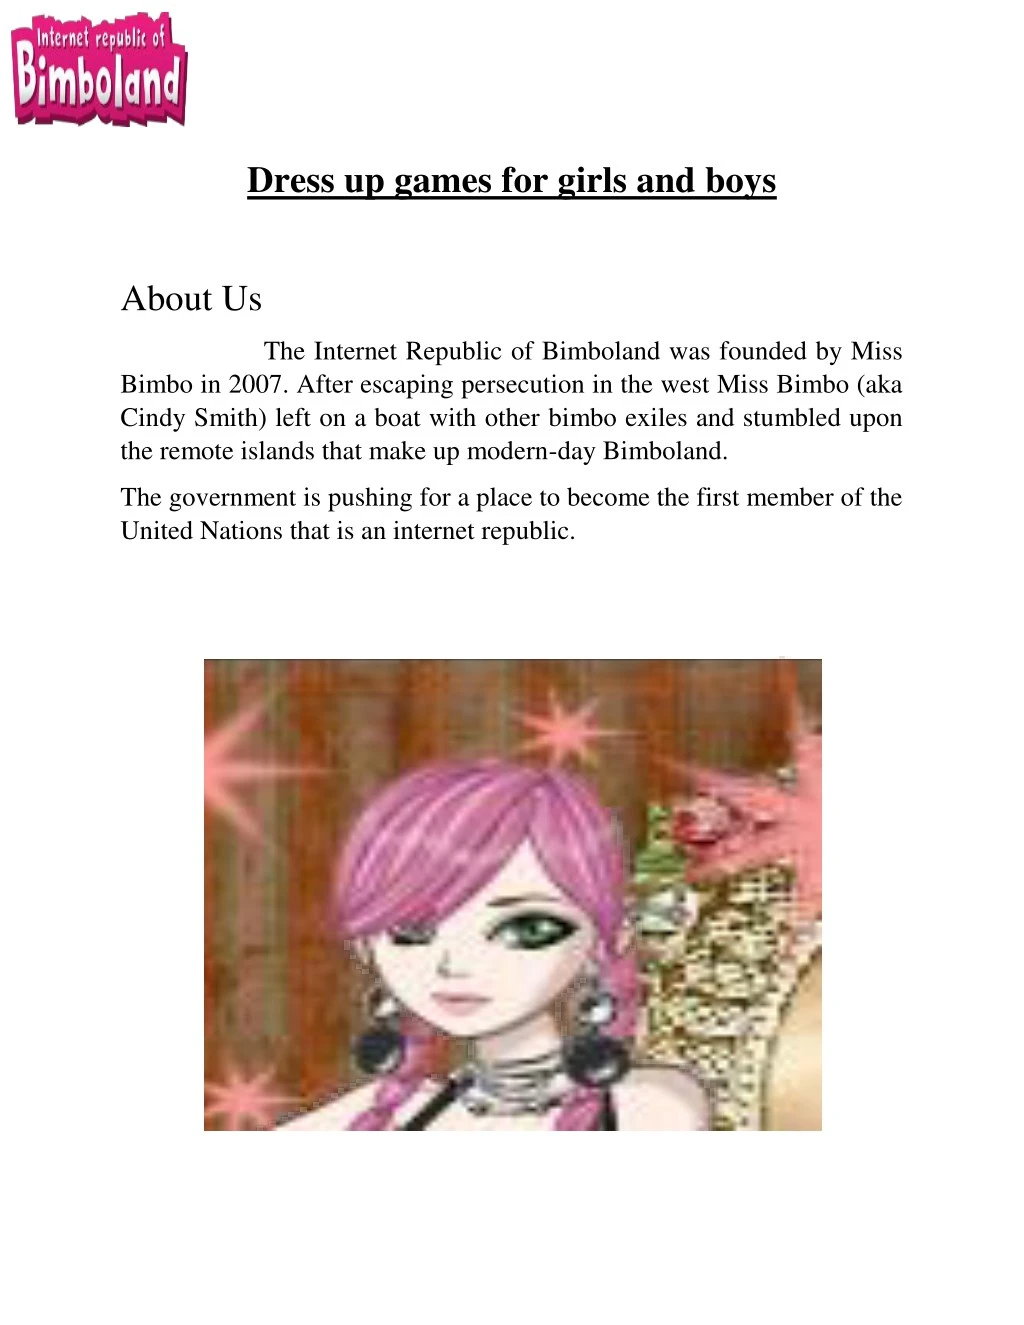 dress up games for girls and boys